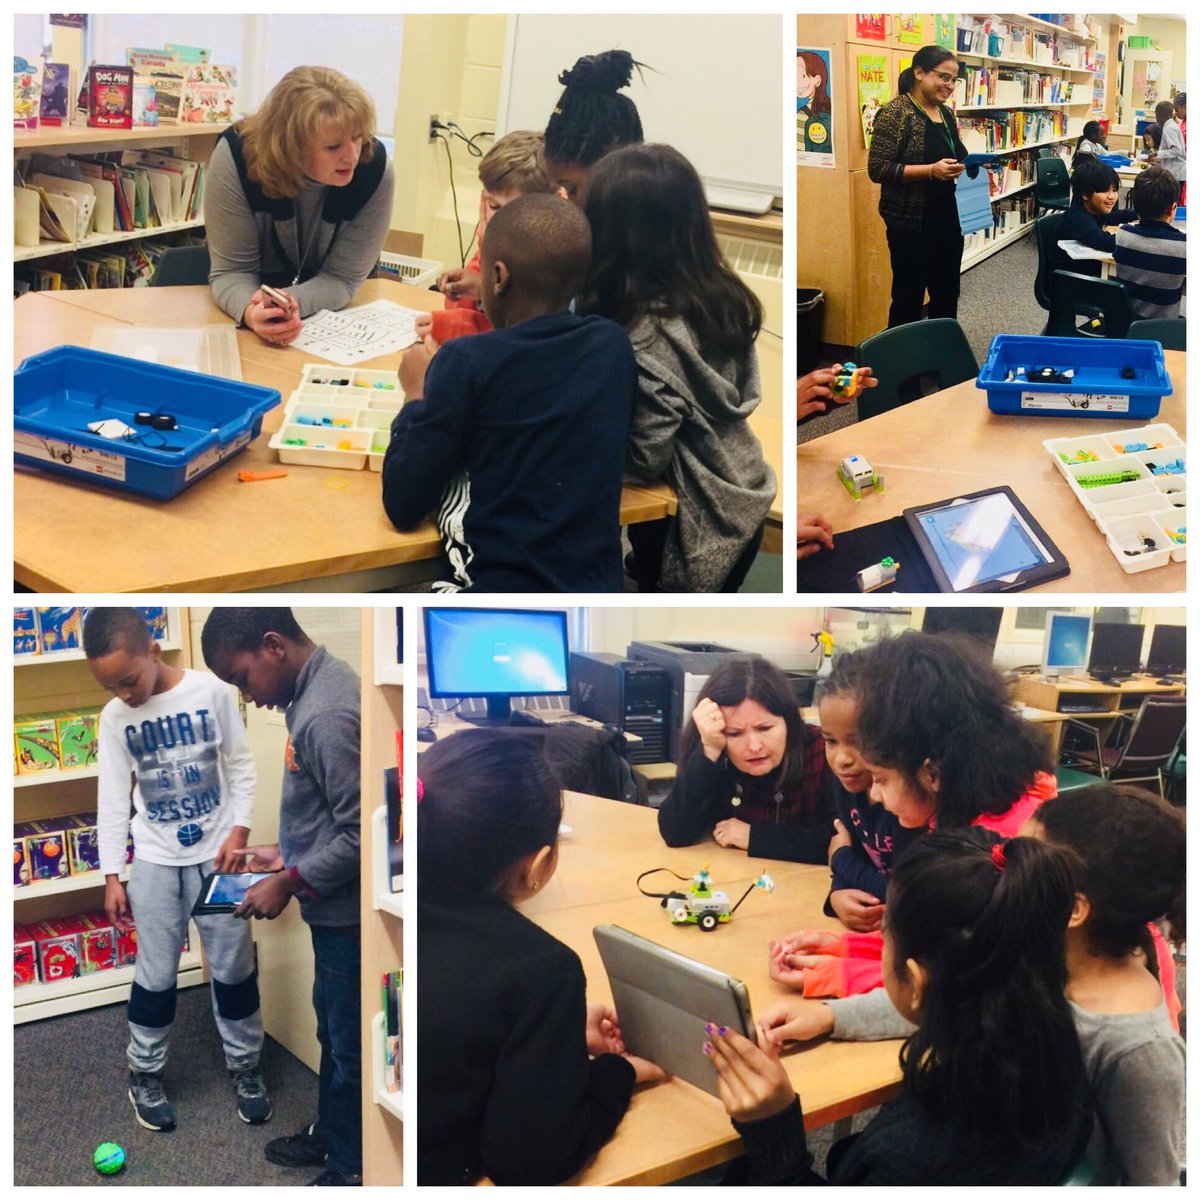 TU Associate Director @Wendy_Dowling & SOE @m_stubbingsnfo for visiting today! Our Juniors loved sharing their coding knowledge & skills learned over the past two months! @cashjim #PeelEML #peel21st